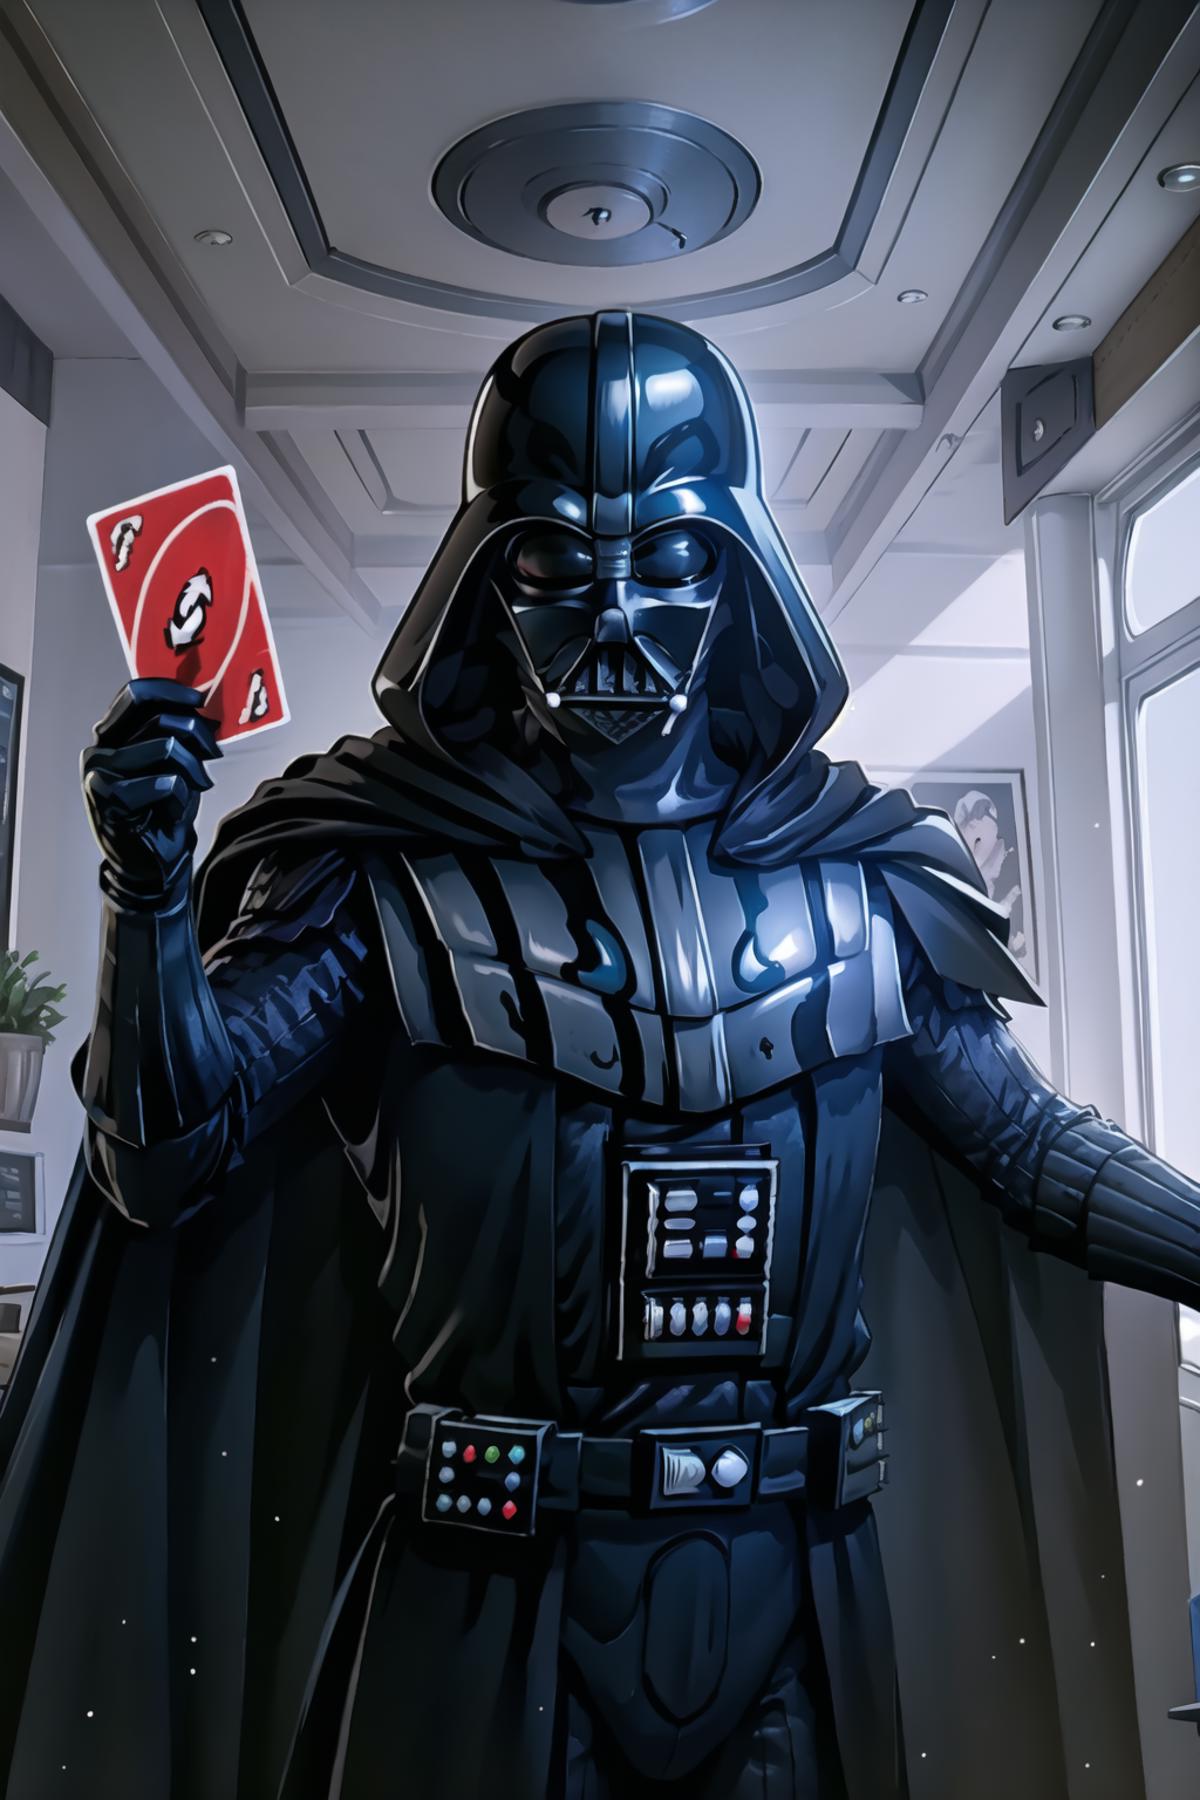 Darth Vader holding a card in a room with a potted plant.